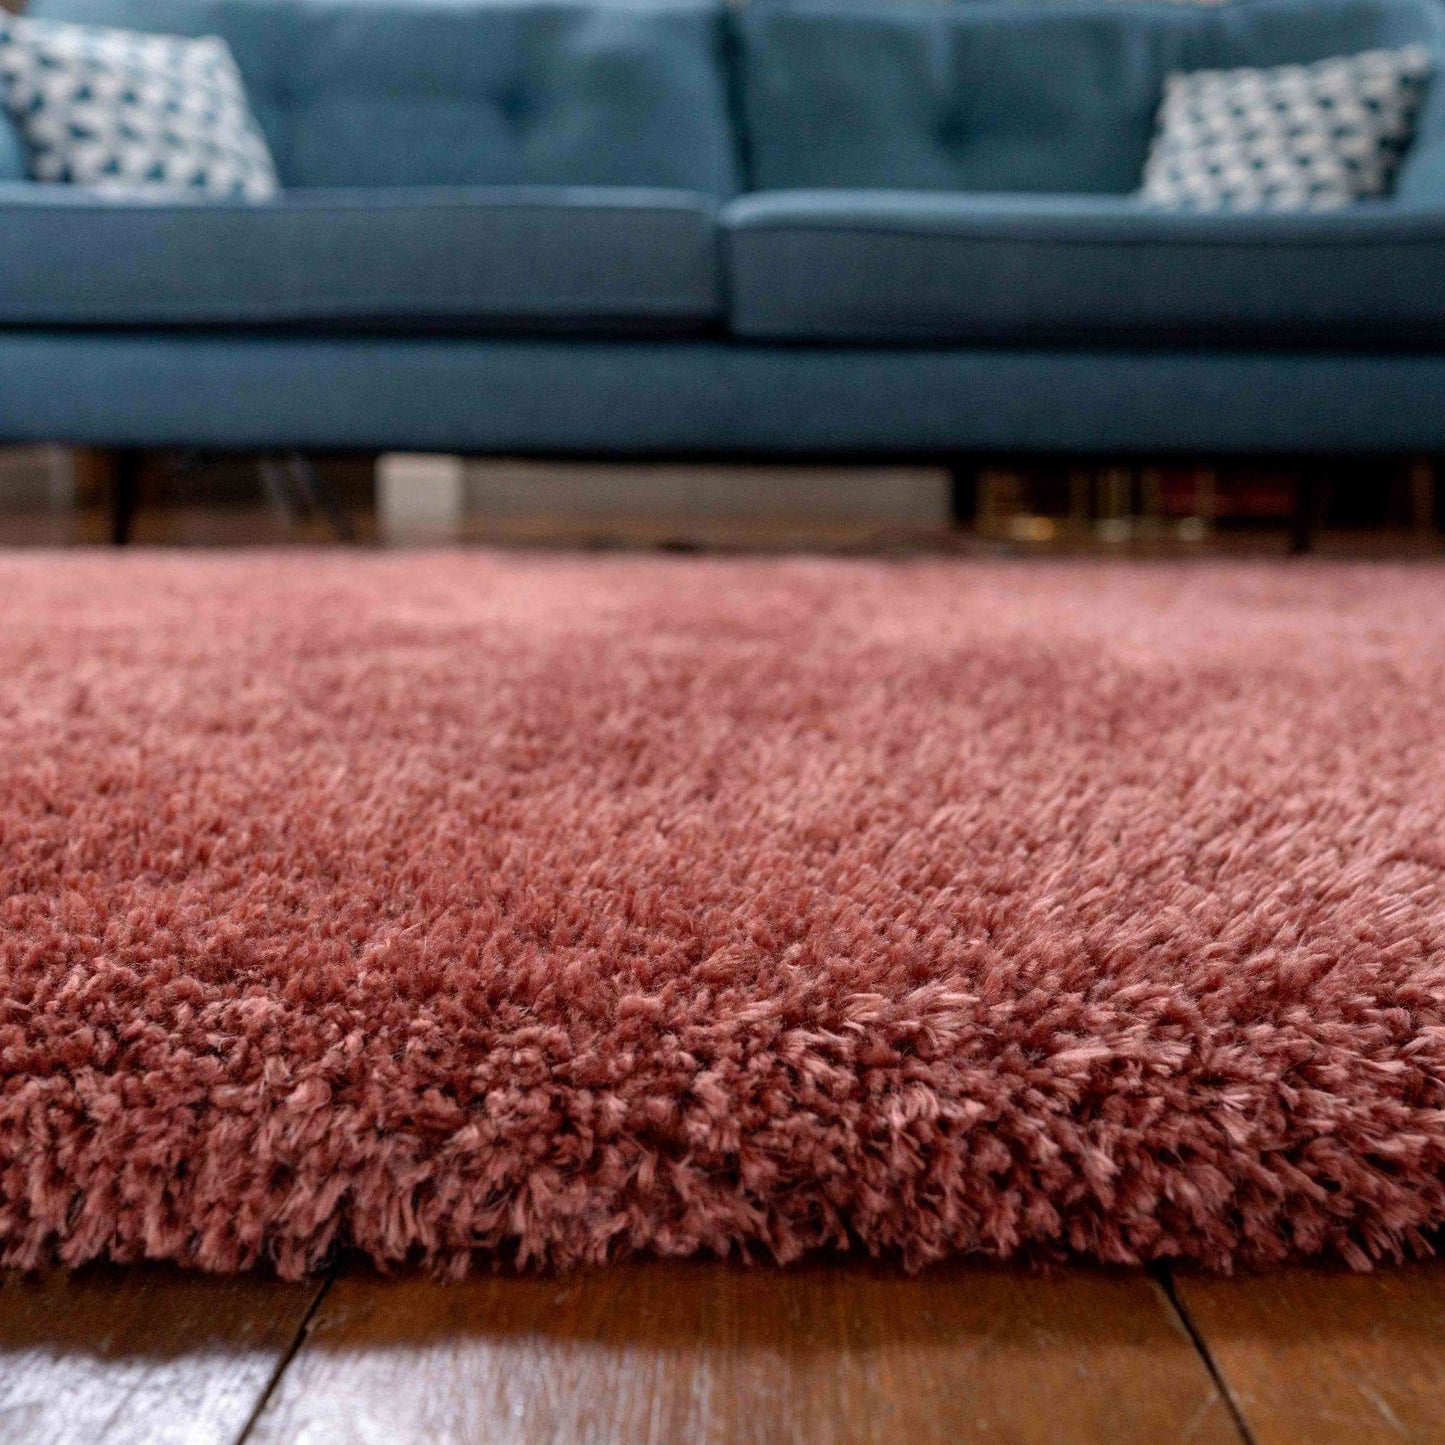 Deluxe Thick Soft Terracotta Shaggy Bedroom Rug